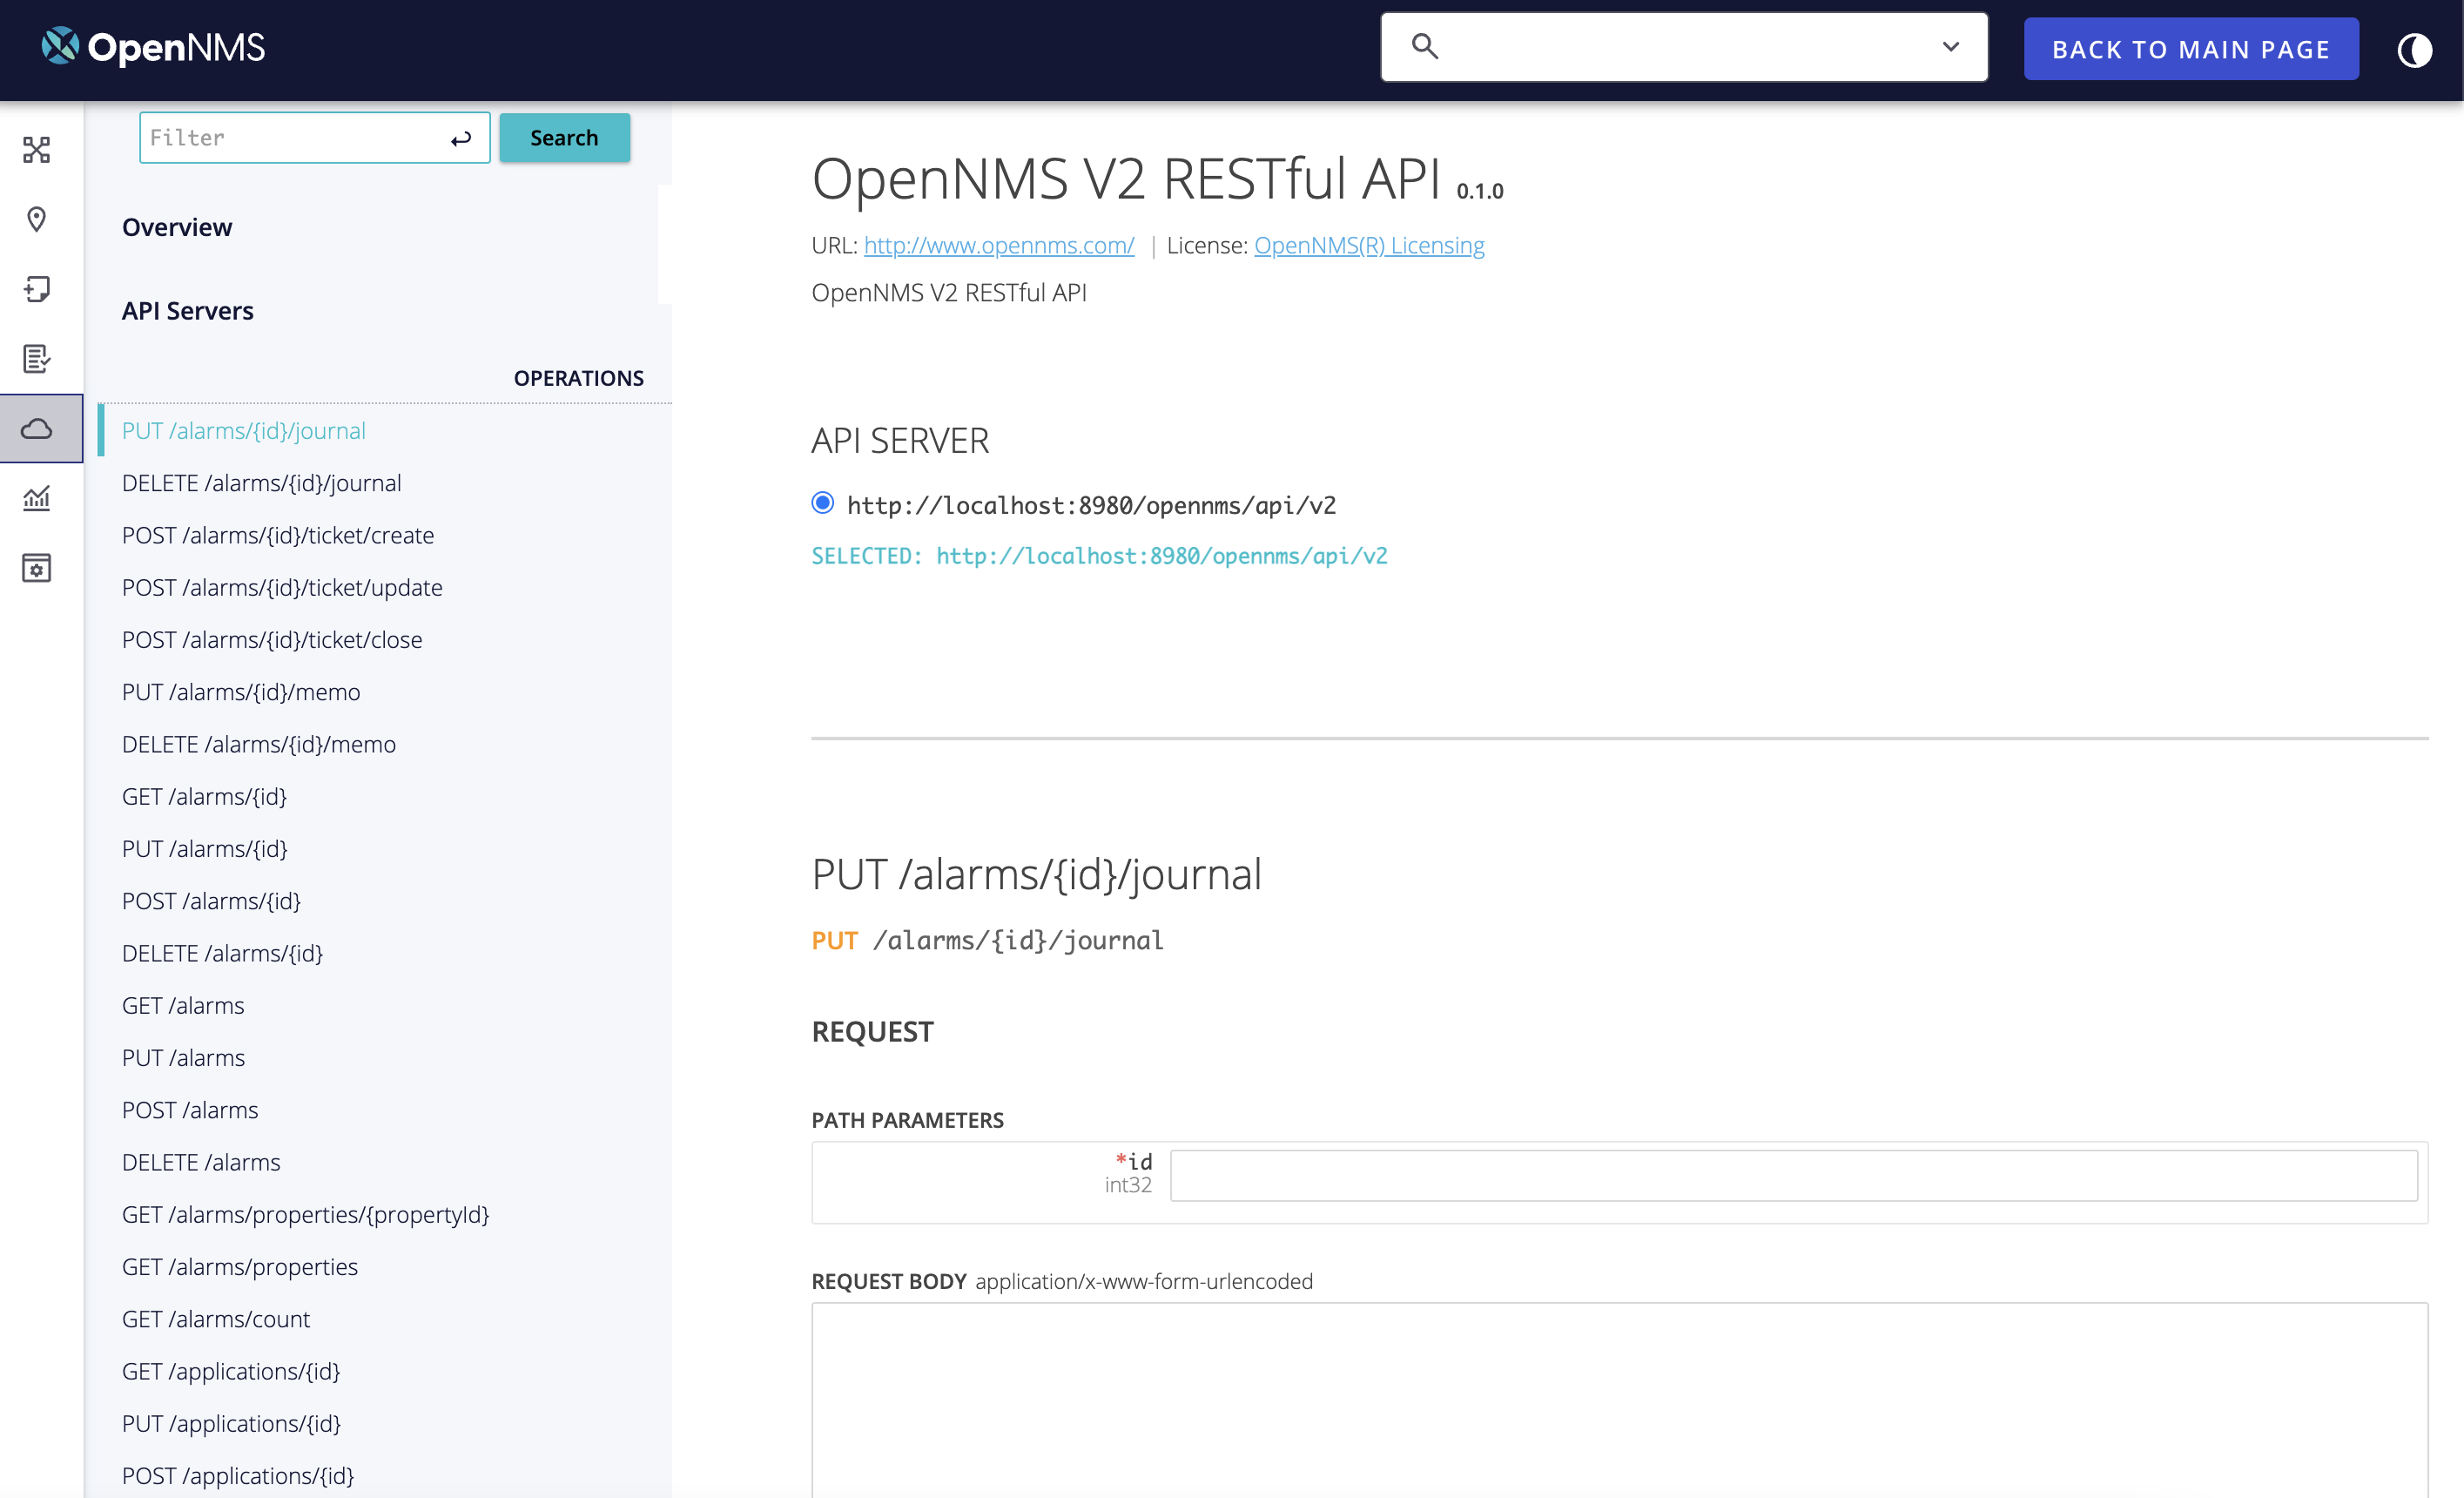 OpenNMS UI displaying the REST API Explorer